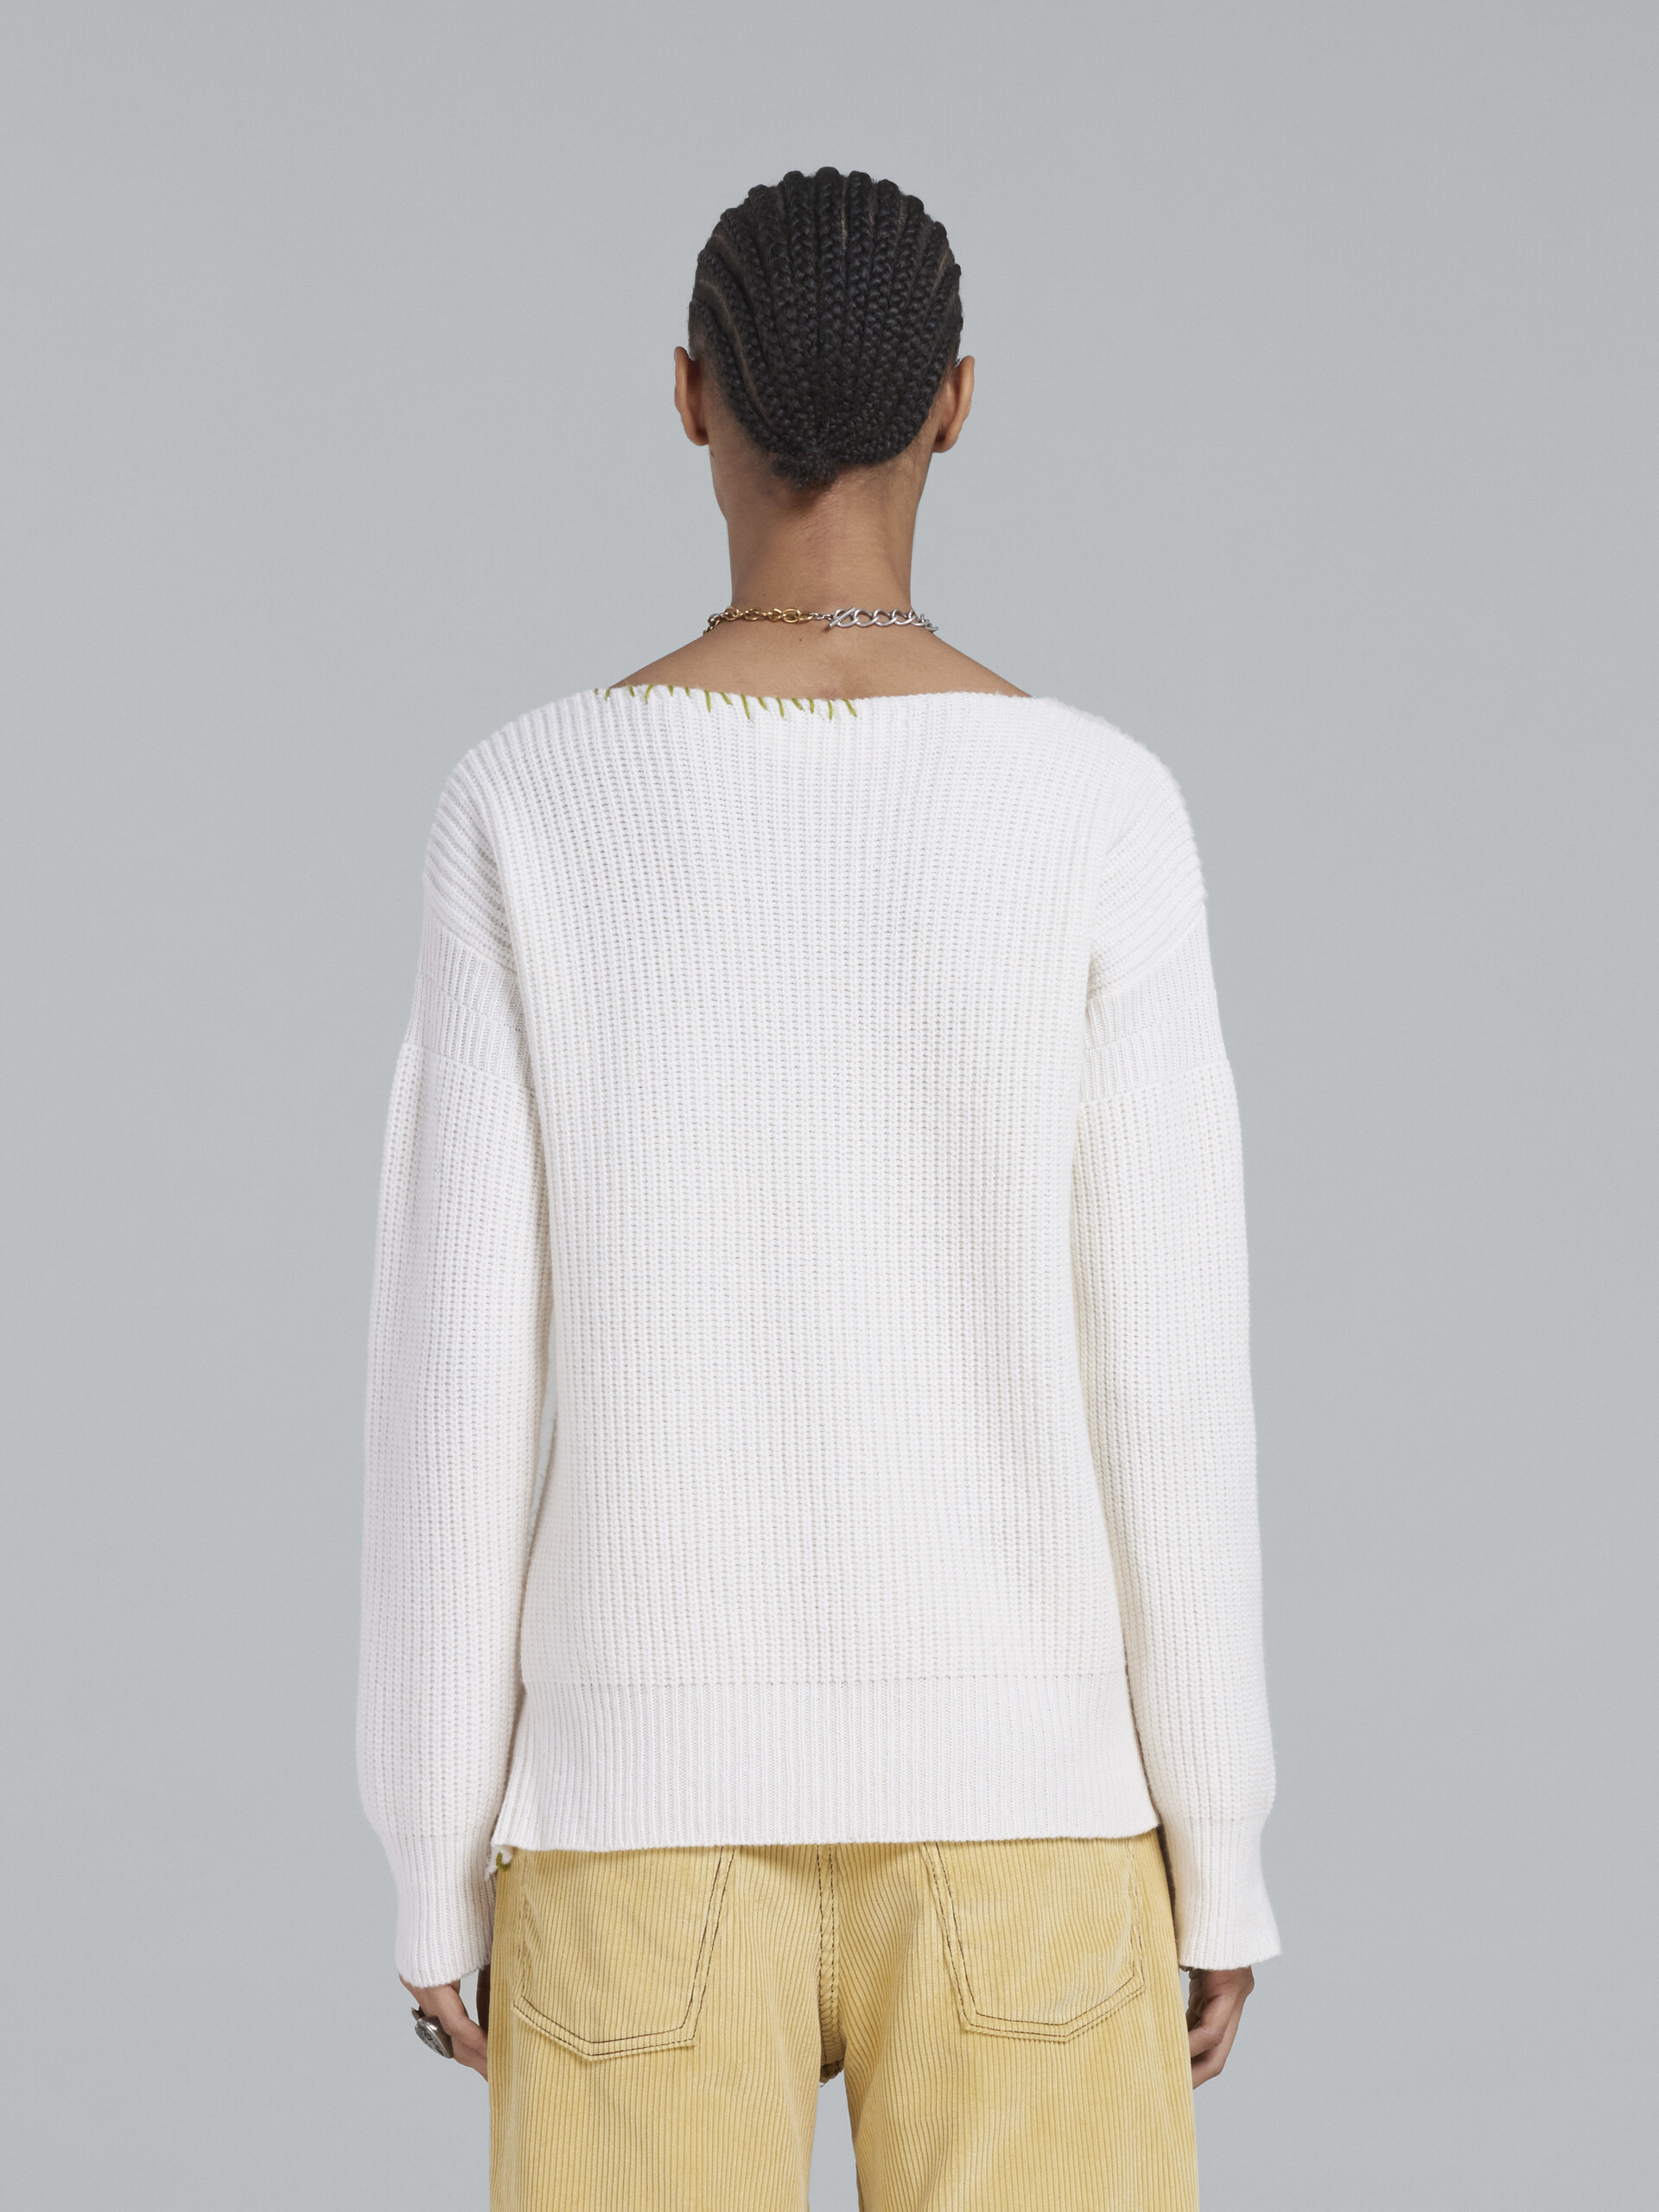 White wool sweater with raw-edge detailing - Pullovers - Image 3